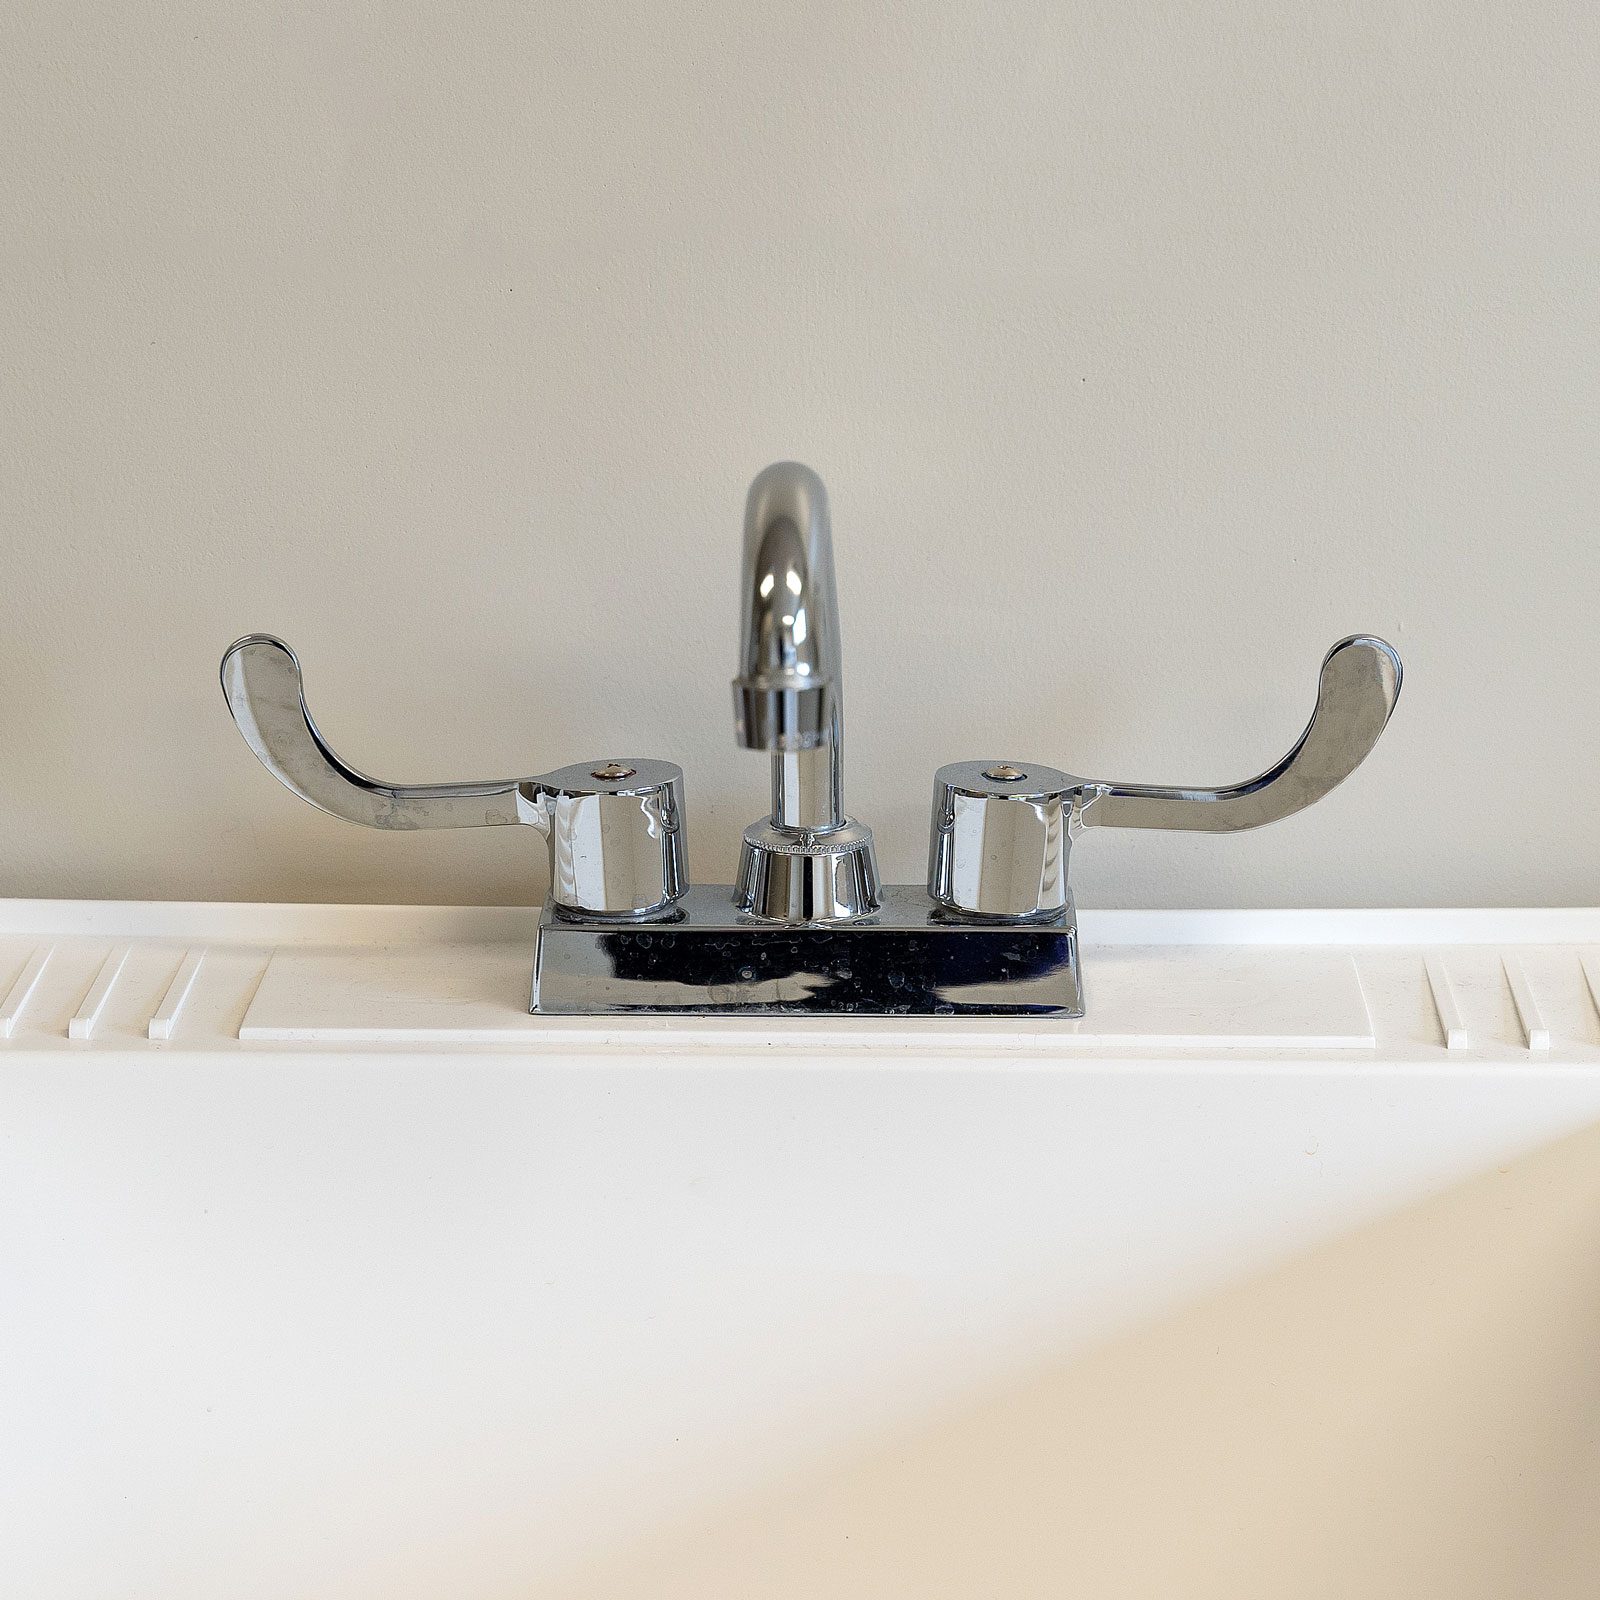 How to Fix a Leaking Faucet in the Laundry Room | Family Handyman